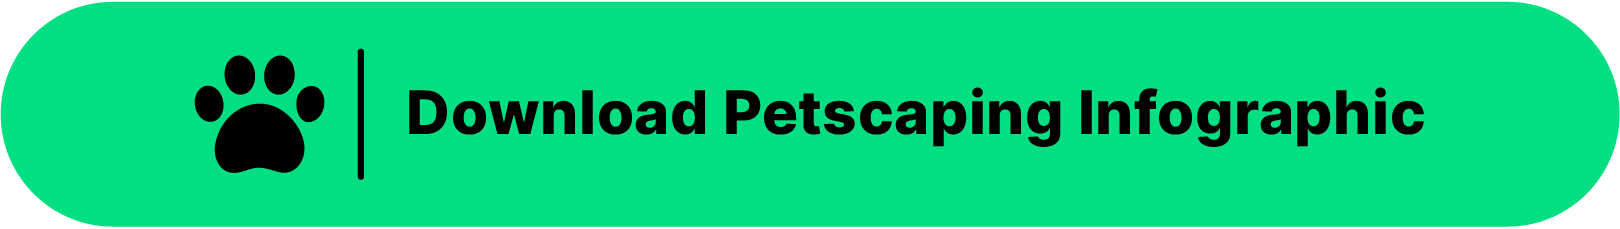 Green download button that reads "Download Petscaping Infographic"